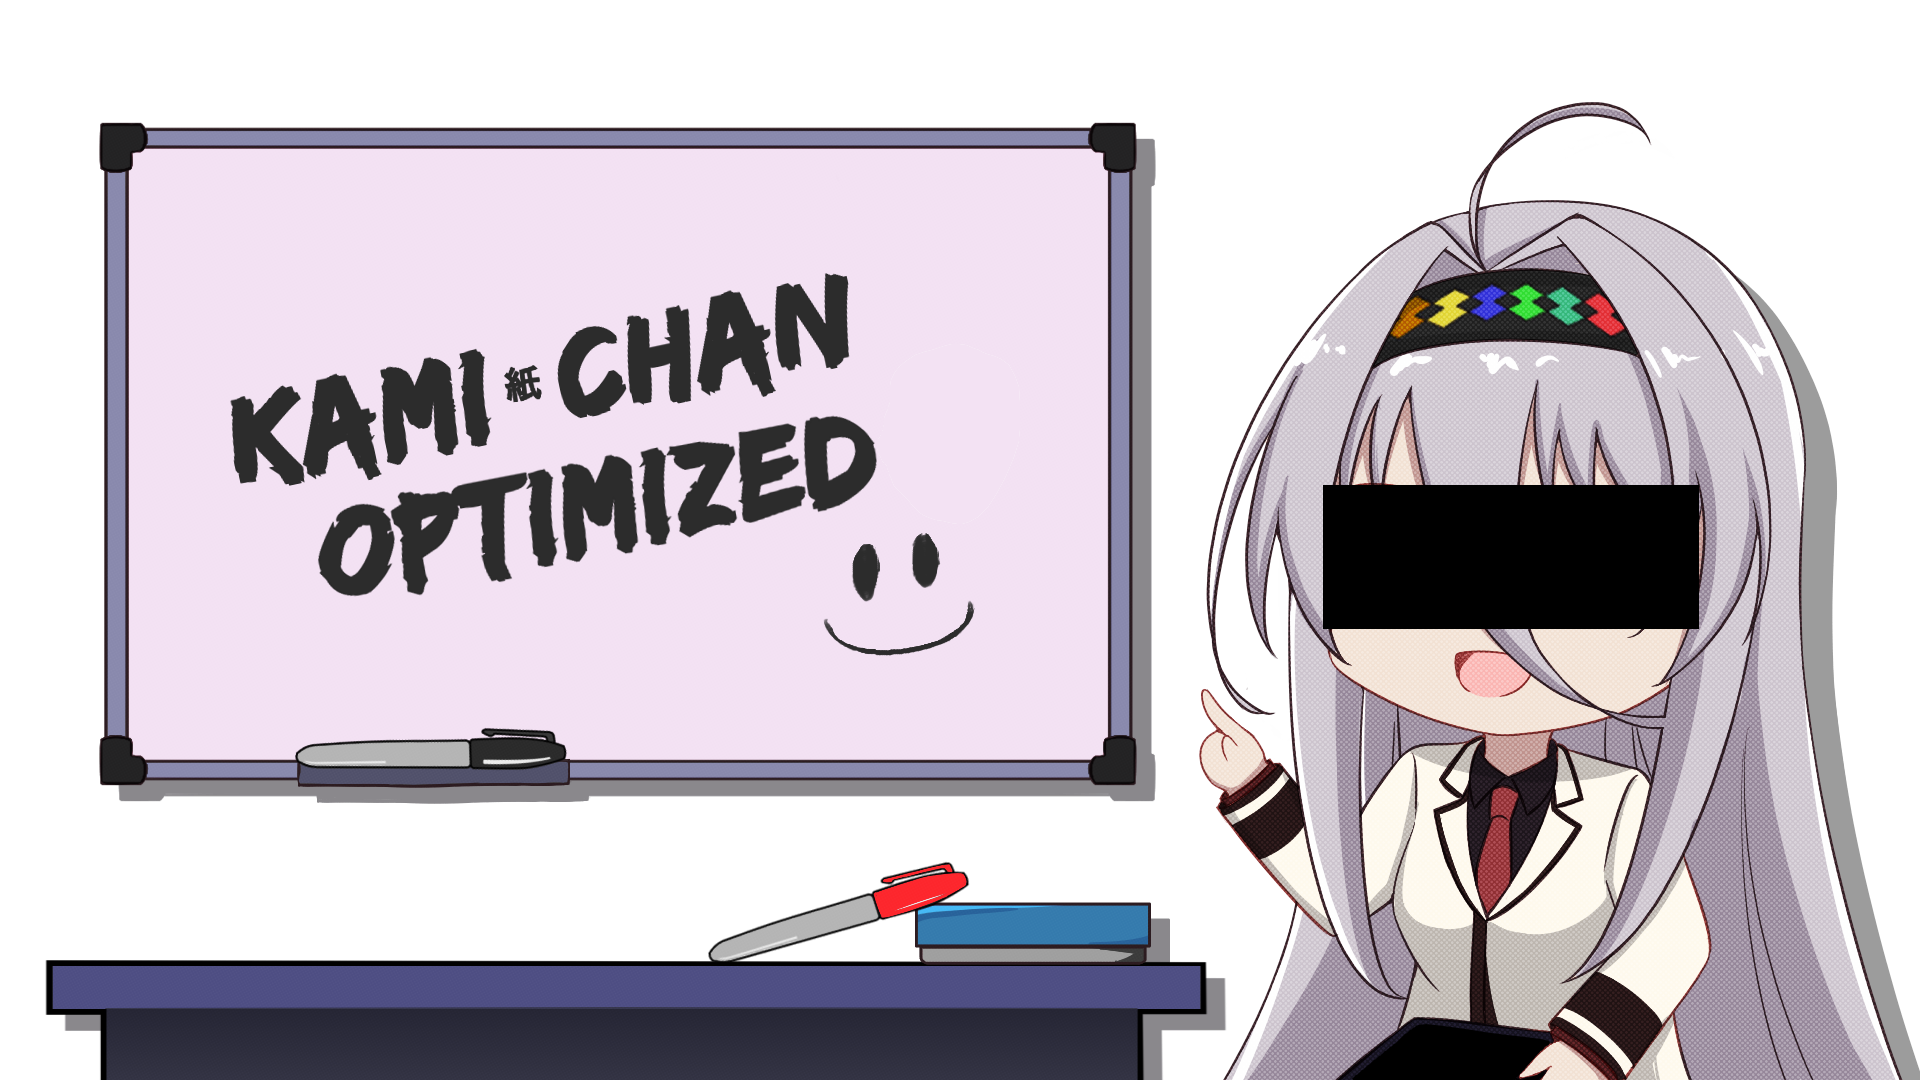 Paper chan's Little Guide to Minecraft Server Optimization